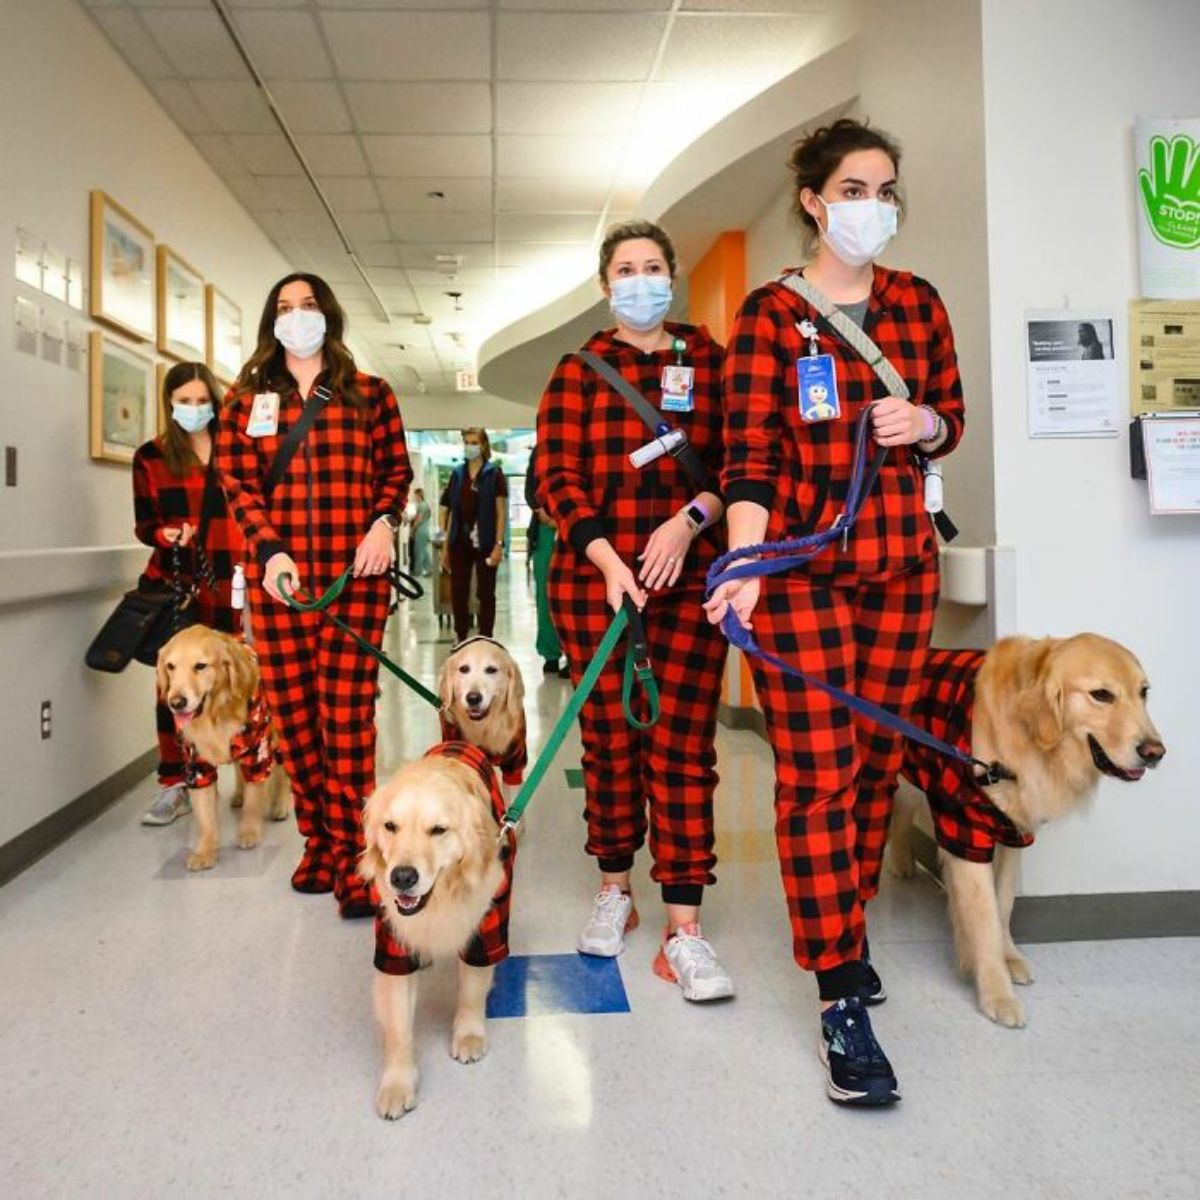 4 women in red and black checkered jumpsuits walking down a hospital hallway with 4 golden retrievers on leashes